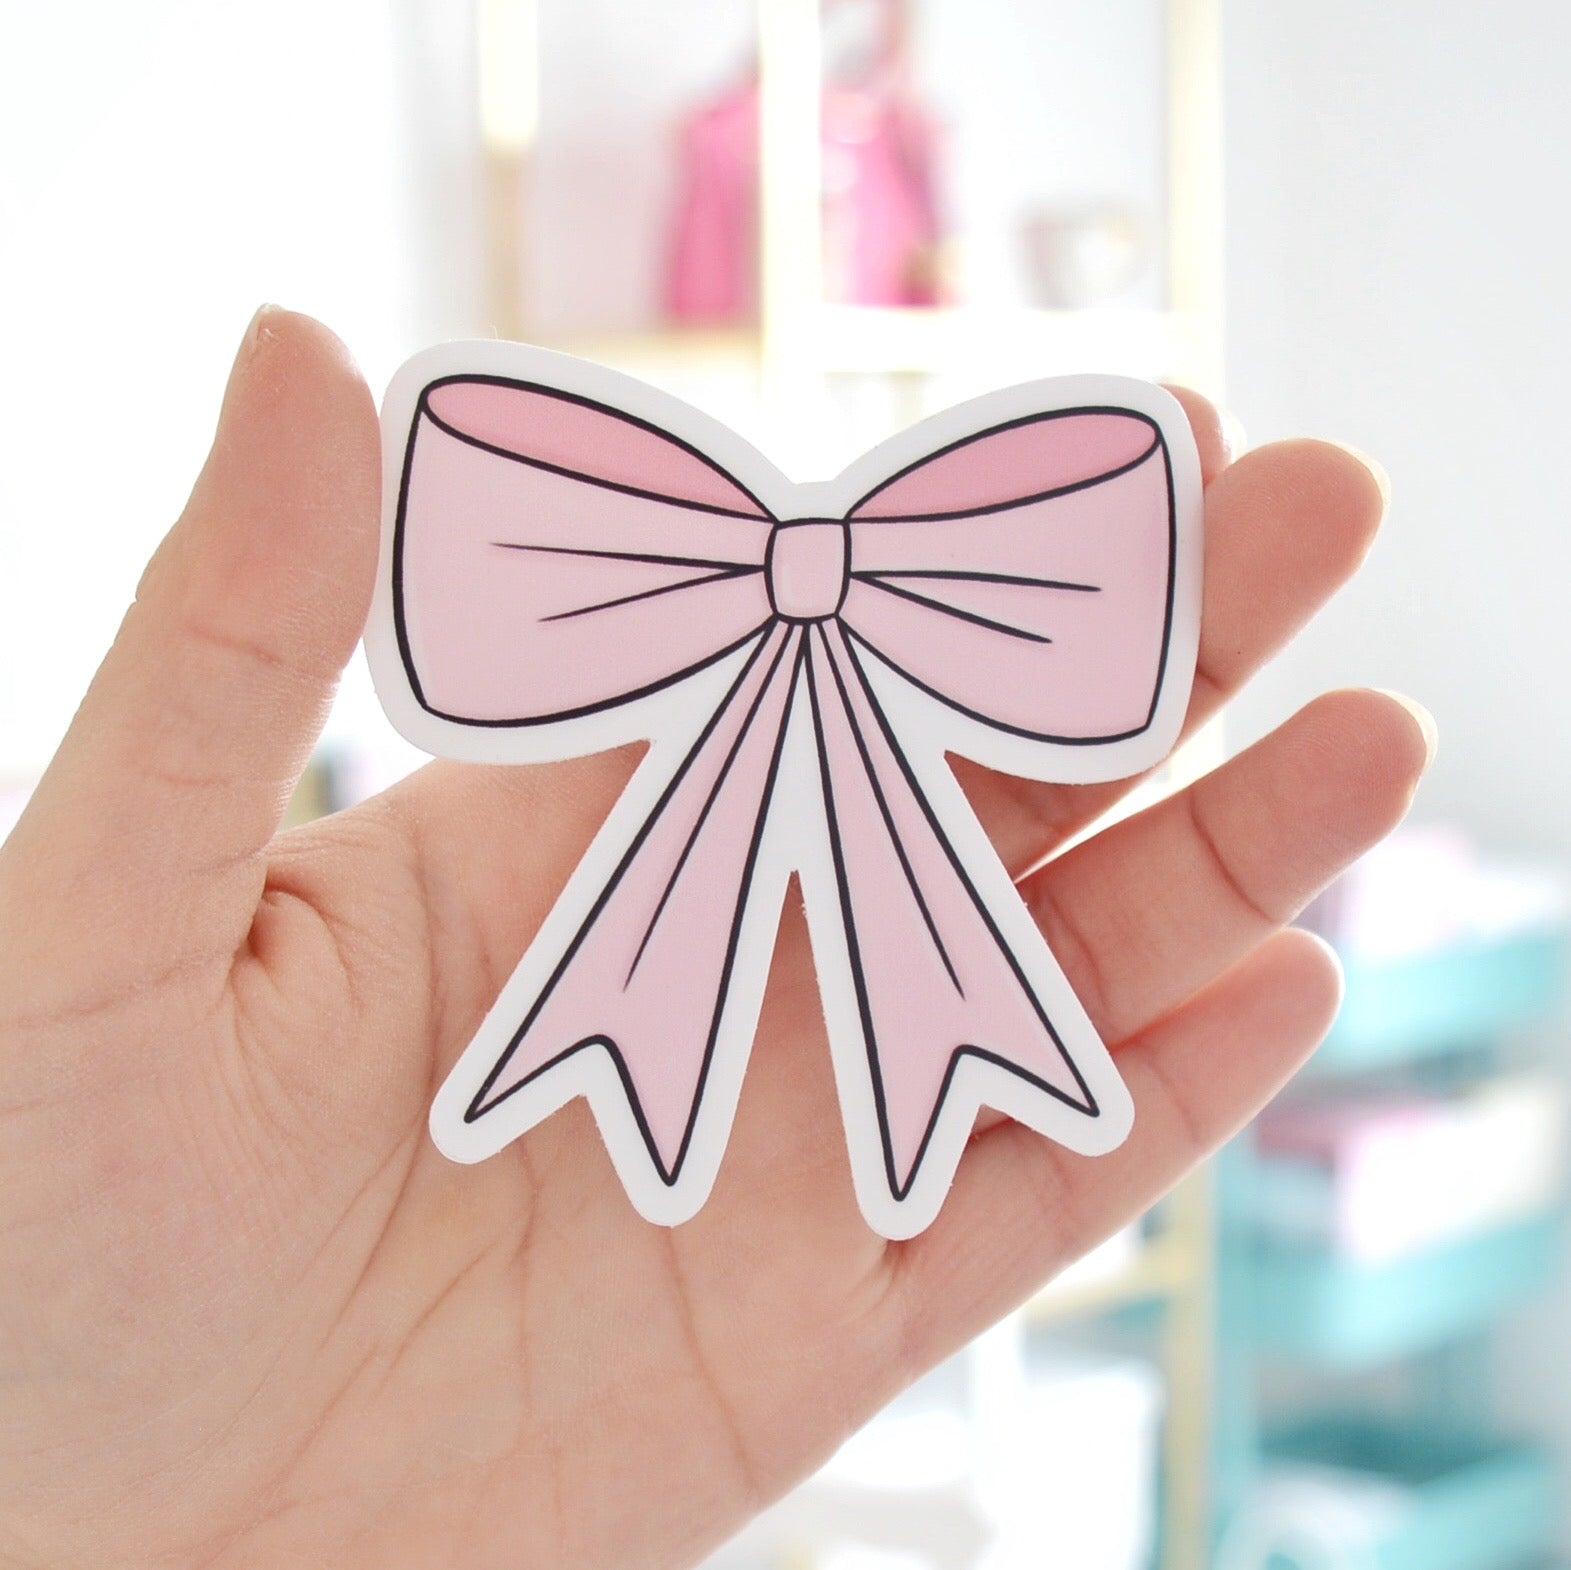 pink bow stickers